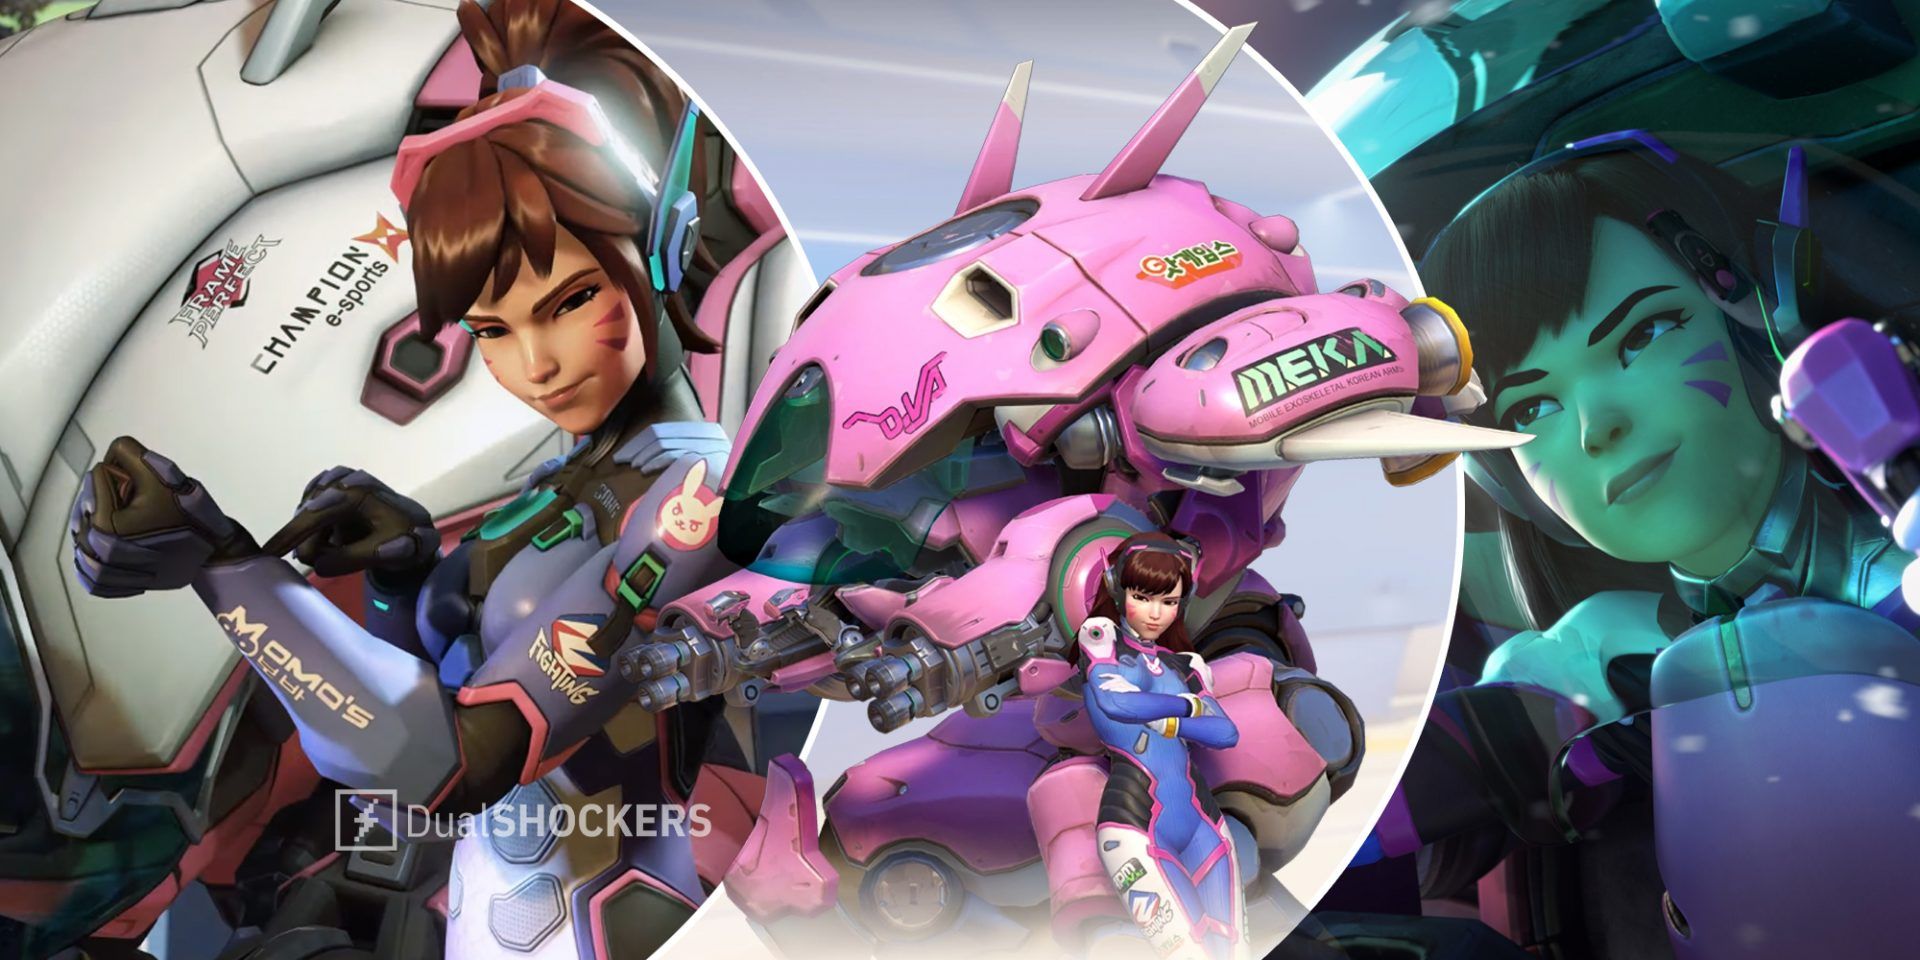 Overwatch 2 D.va on left, Overwatch D.va with Meka in middle, D.va close up on right